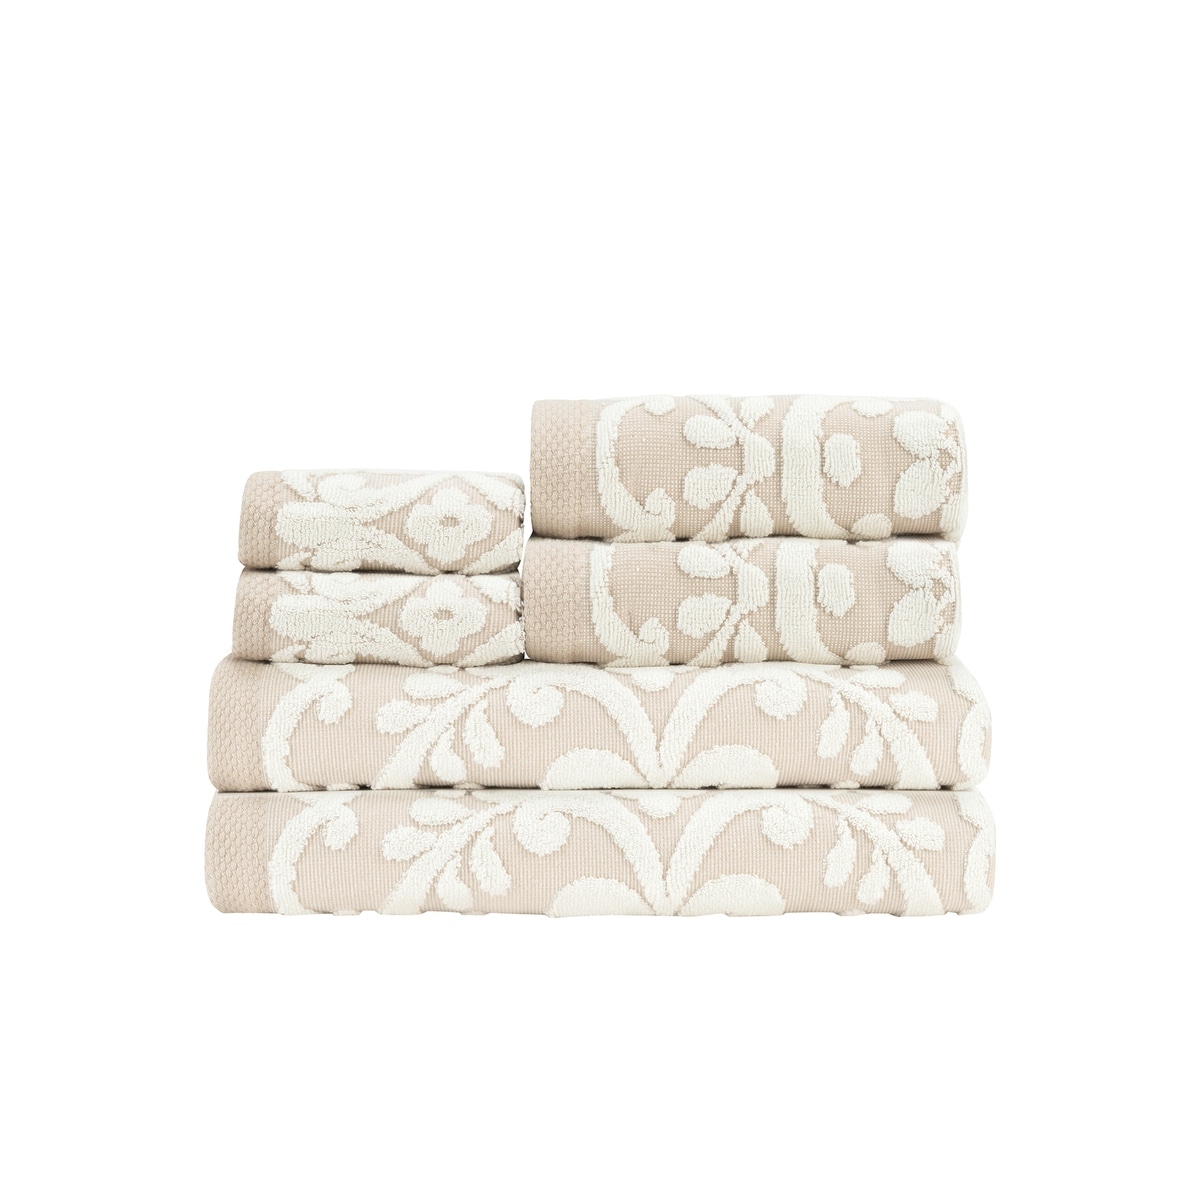 https://ak1.ostkcdn.com/images/products/is/images/direct/48d37bff235bb00e51d1eca132a0a85d1f7601de/Caro-Home-Emma-Six-Piece-Towel-Set.jpg